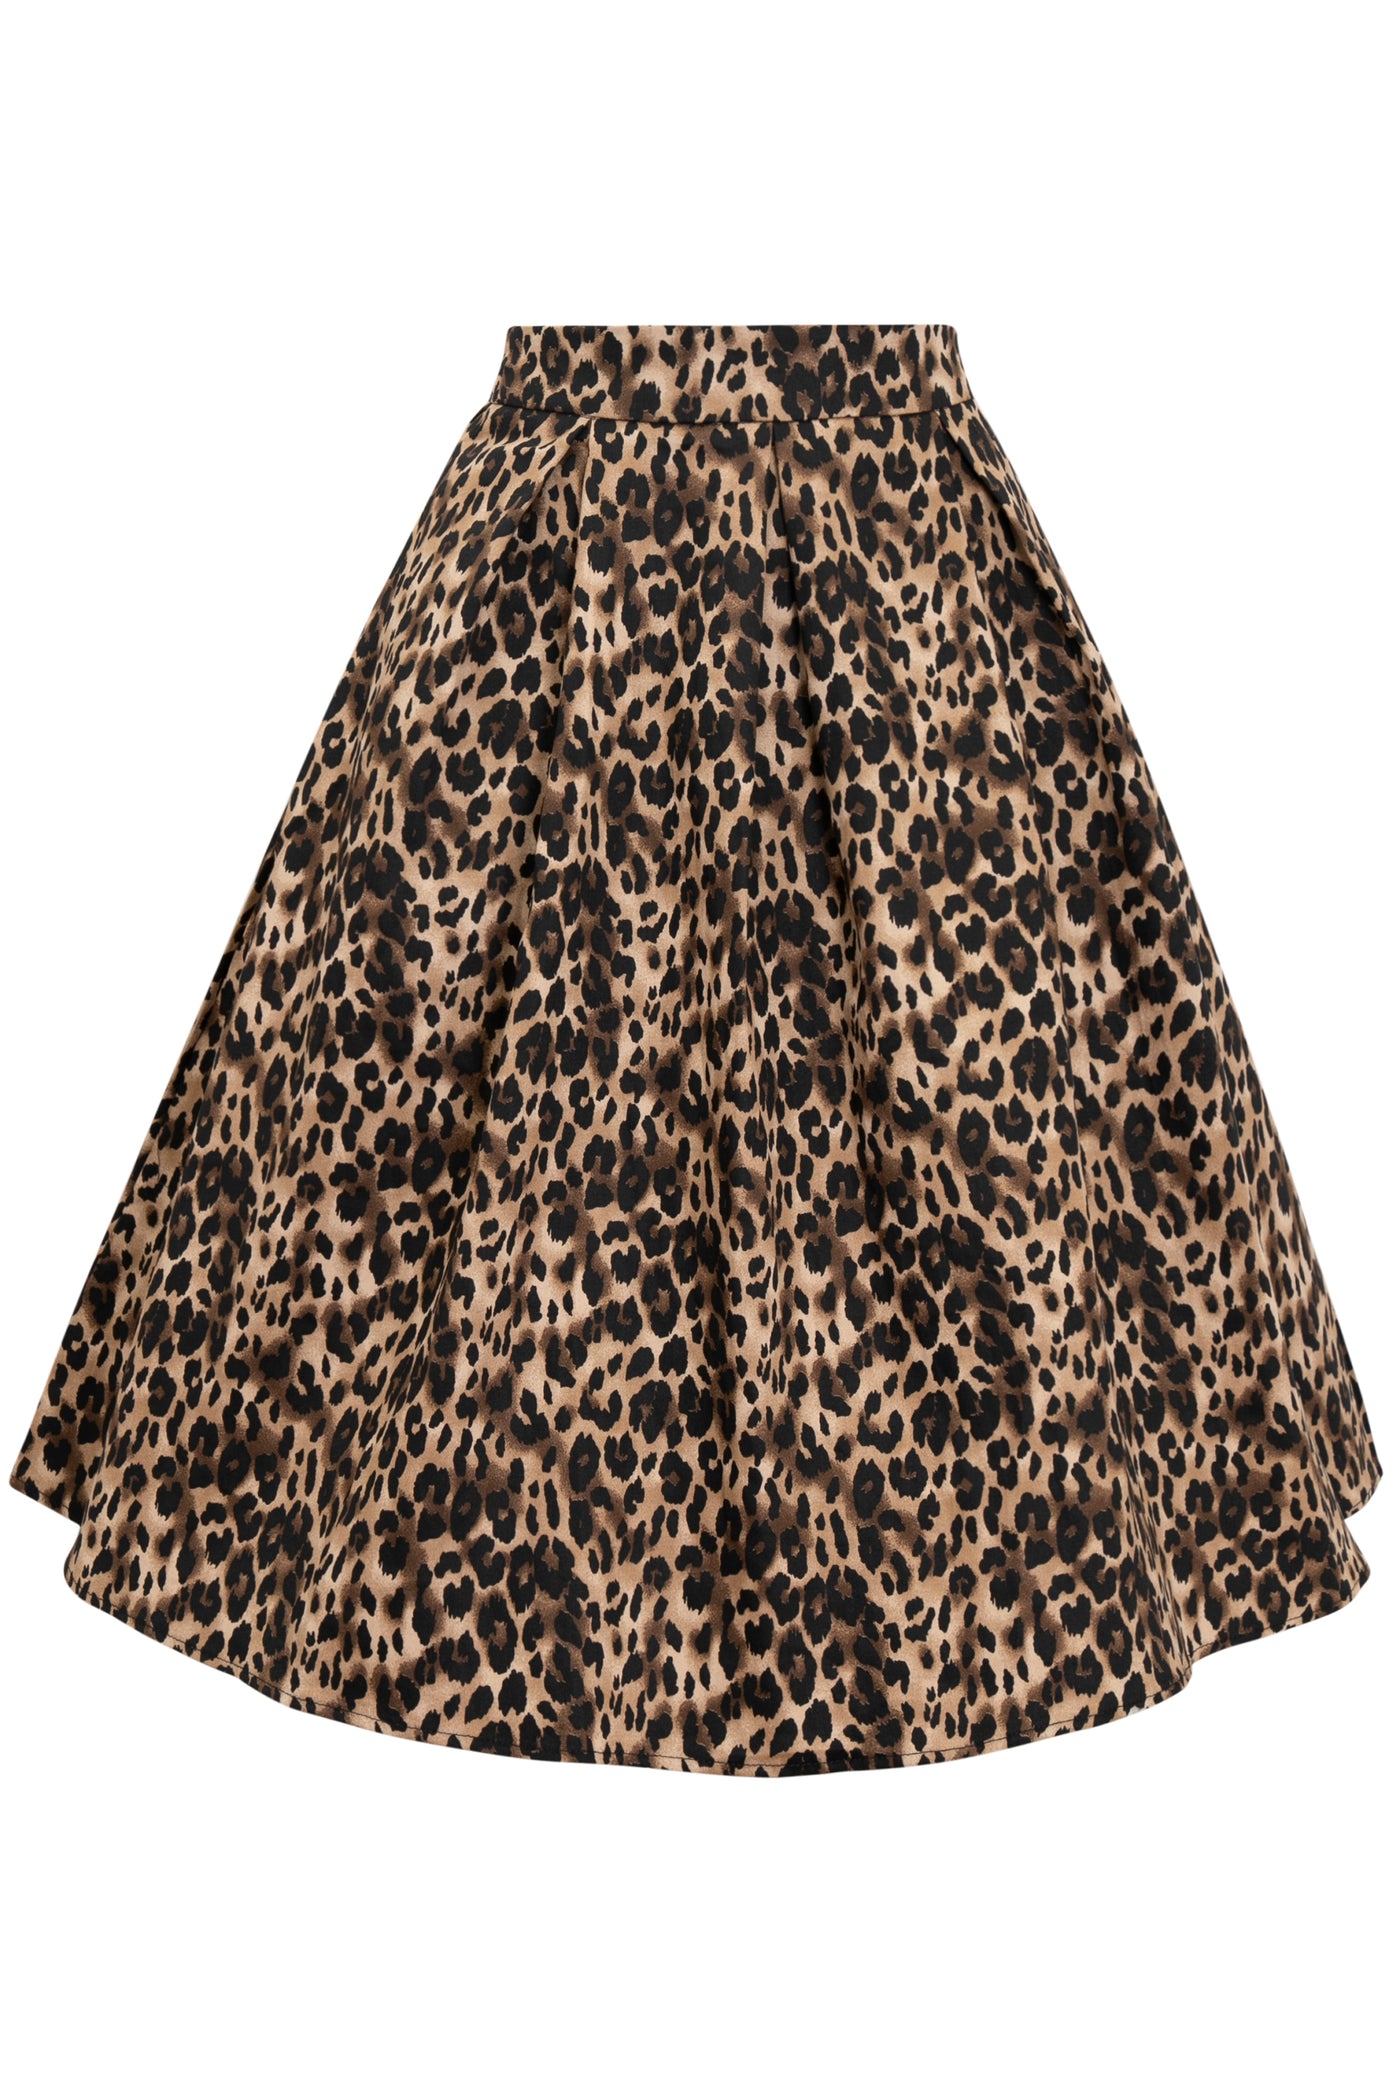 Brown leopard print flared skirt front